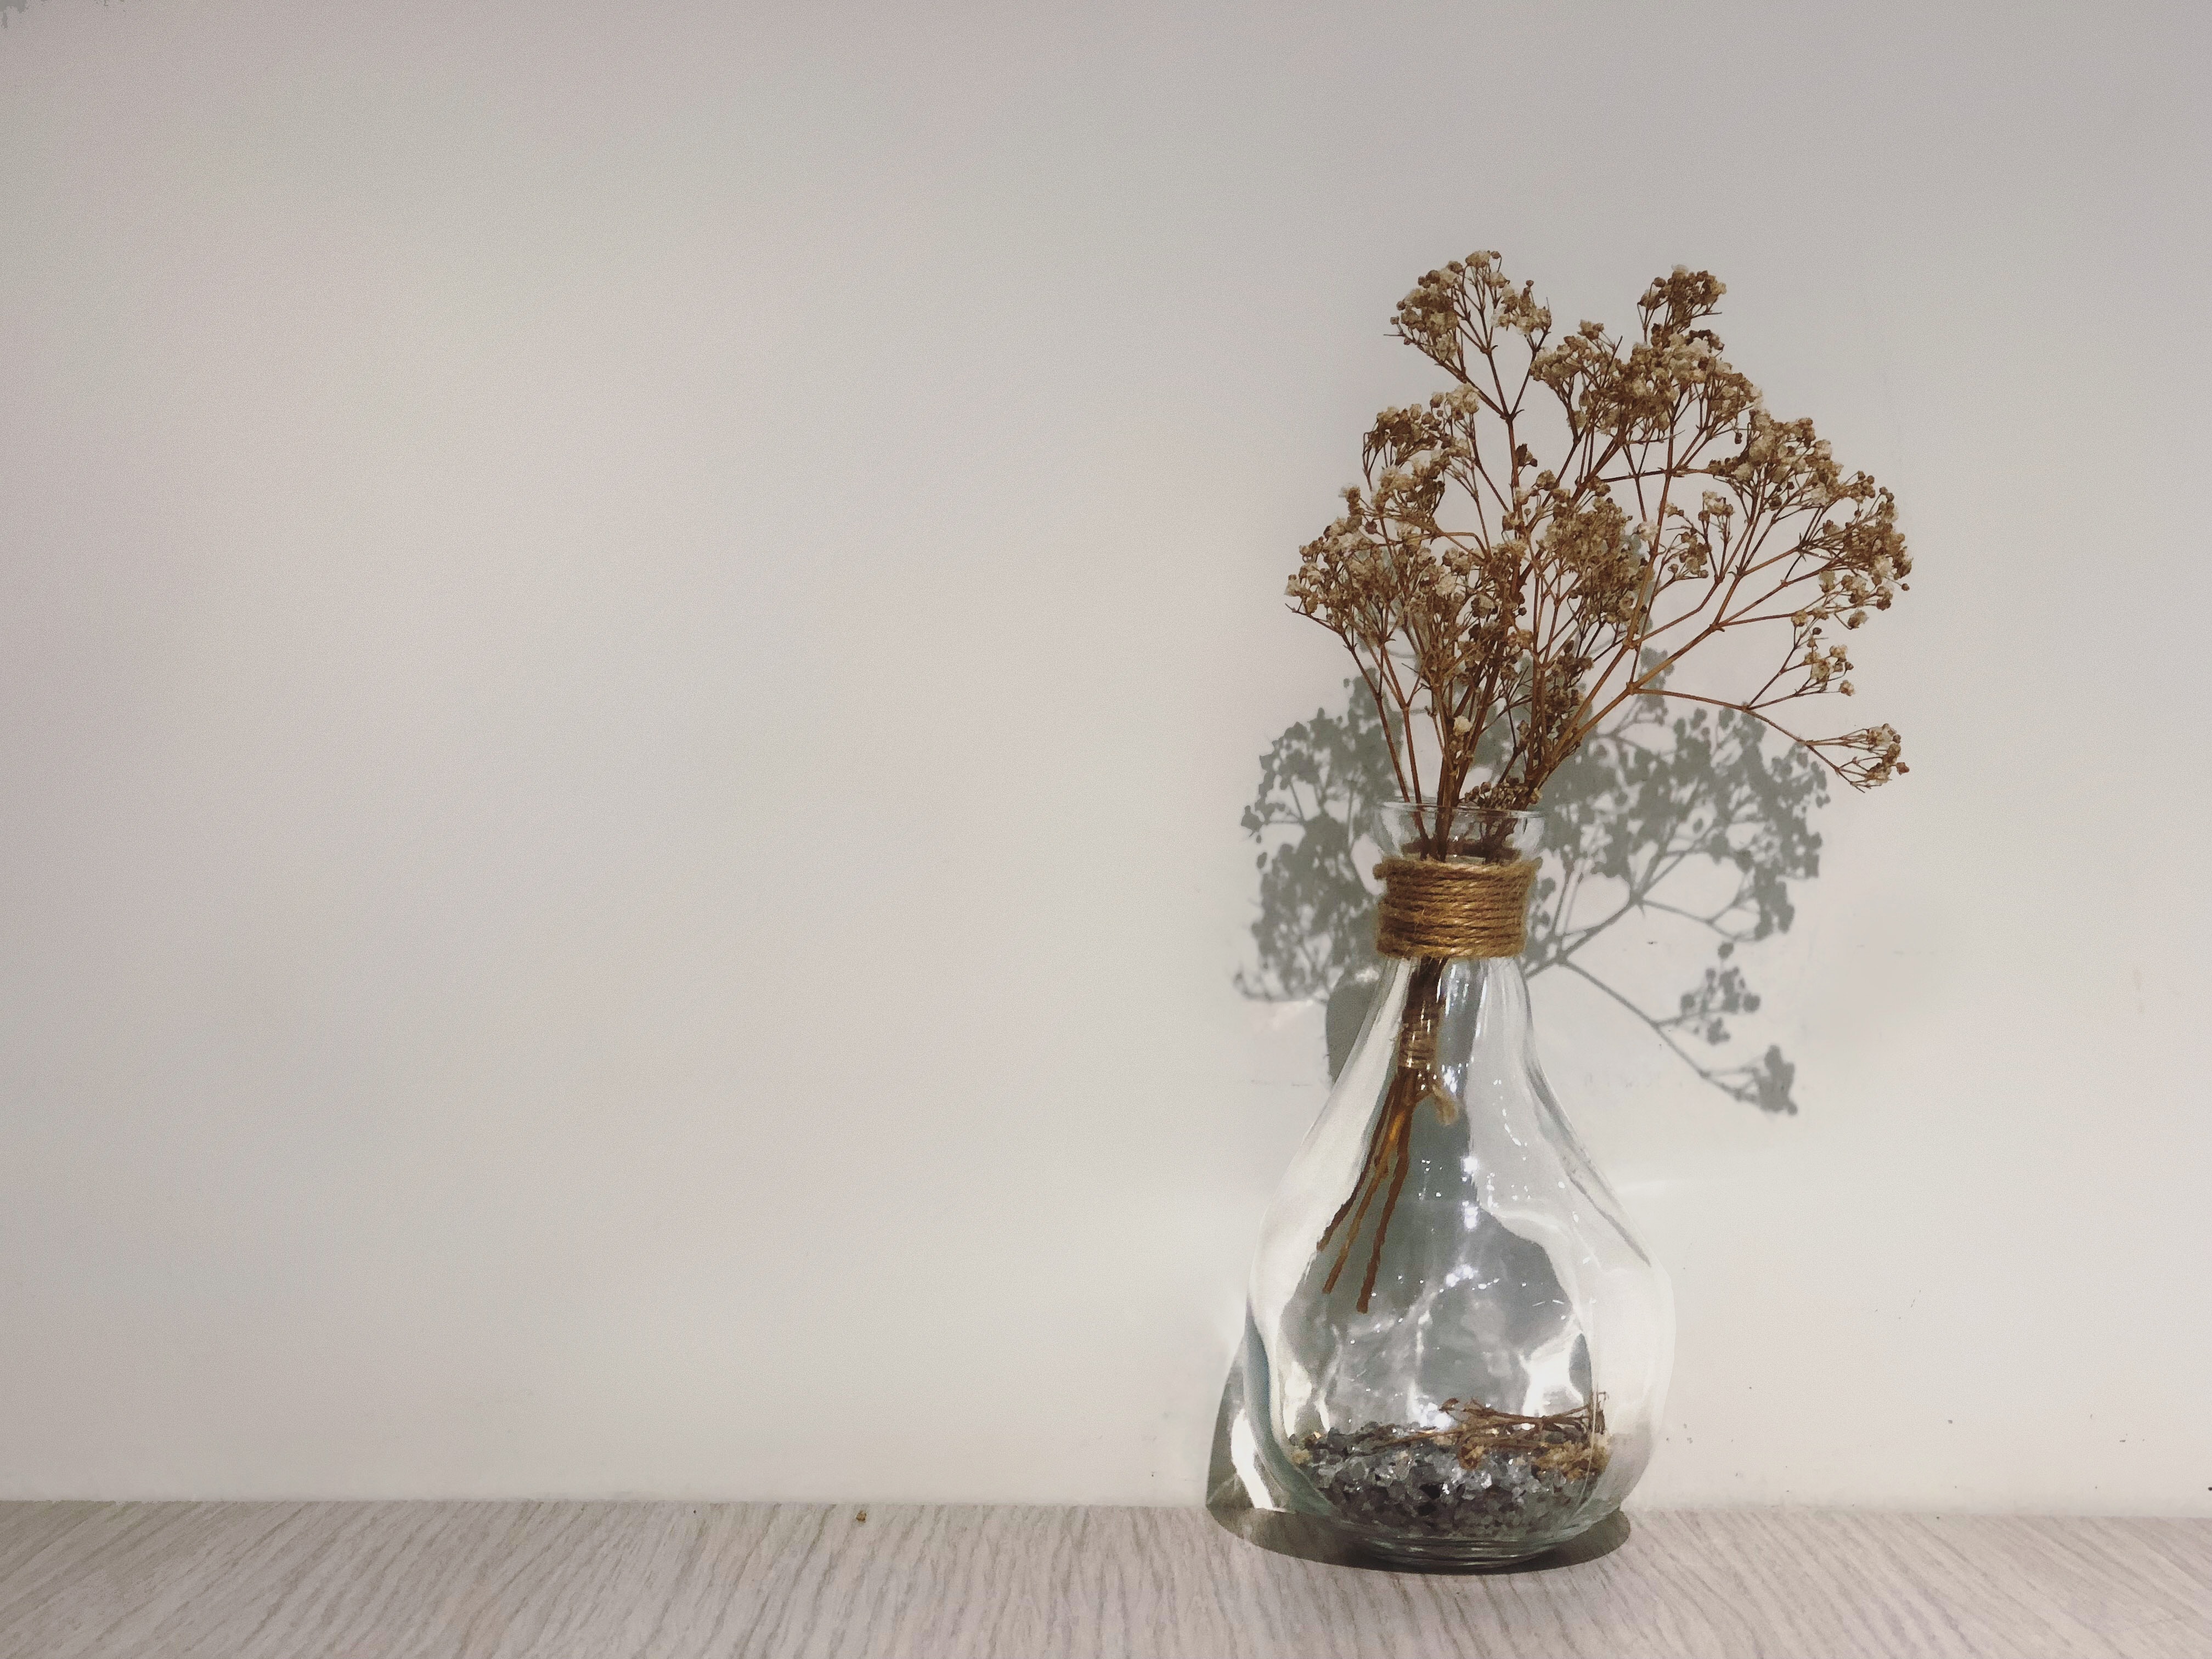 Dried Leaves on Glass Vase Beside Concrete Wall free photo download. 